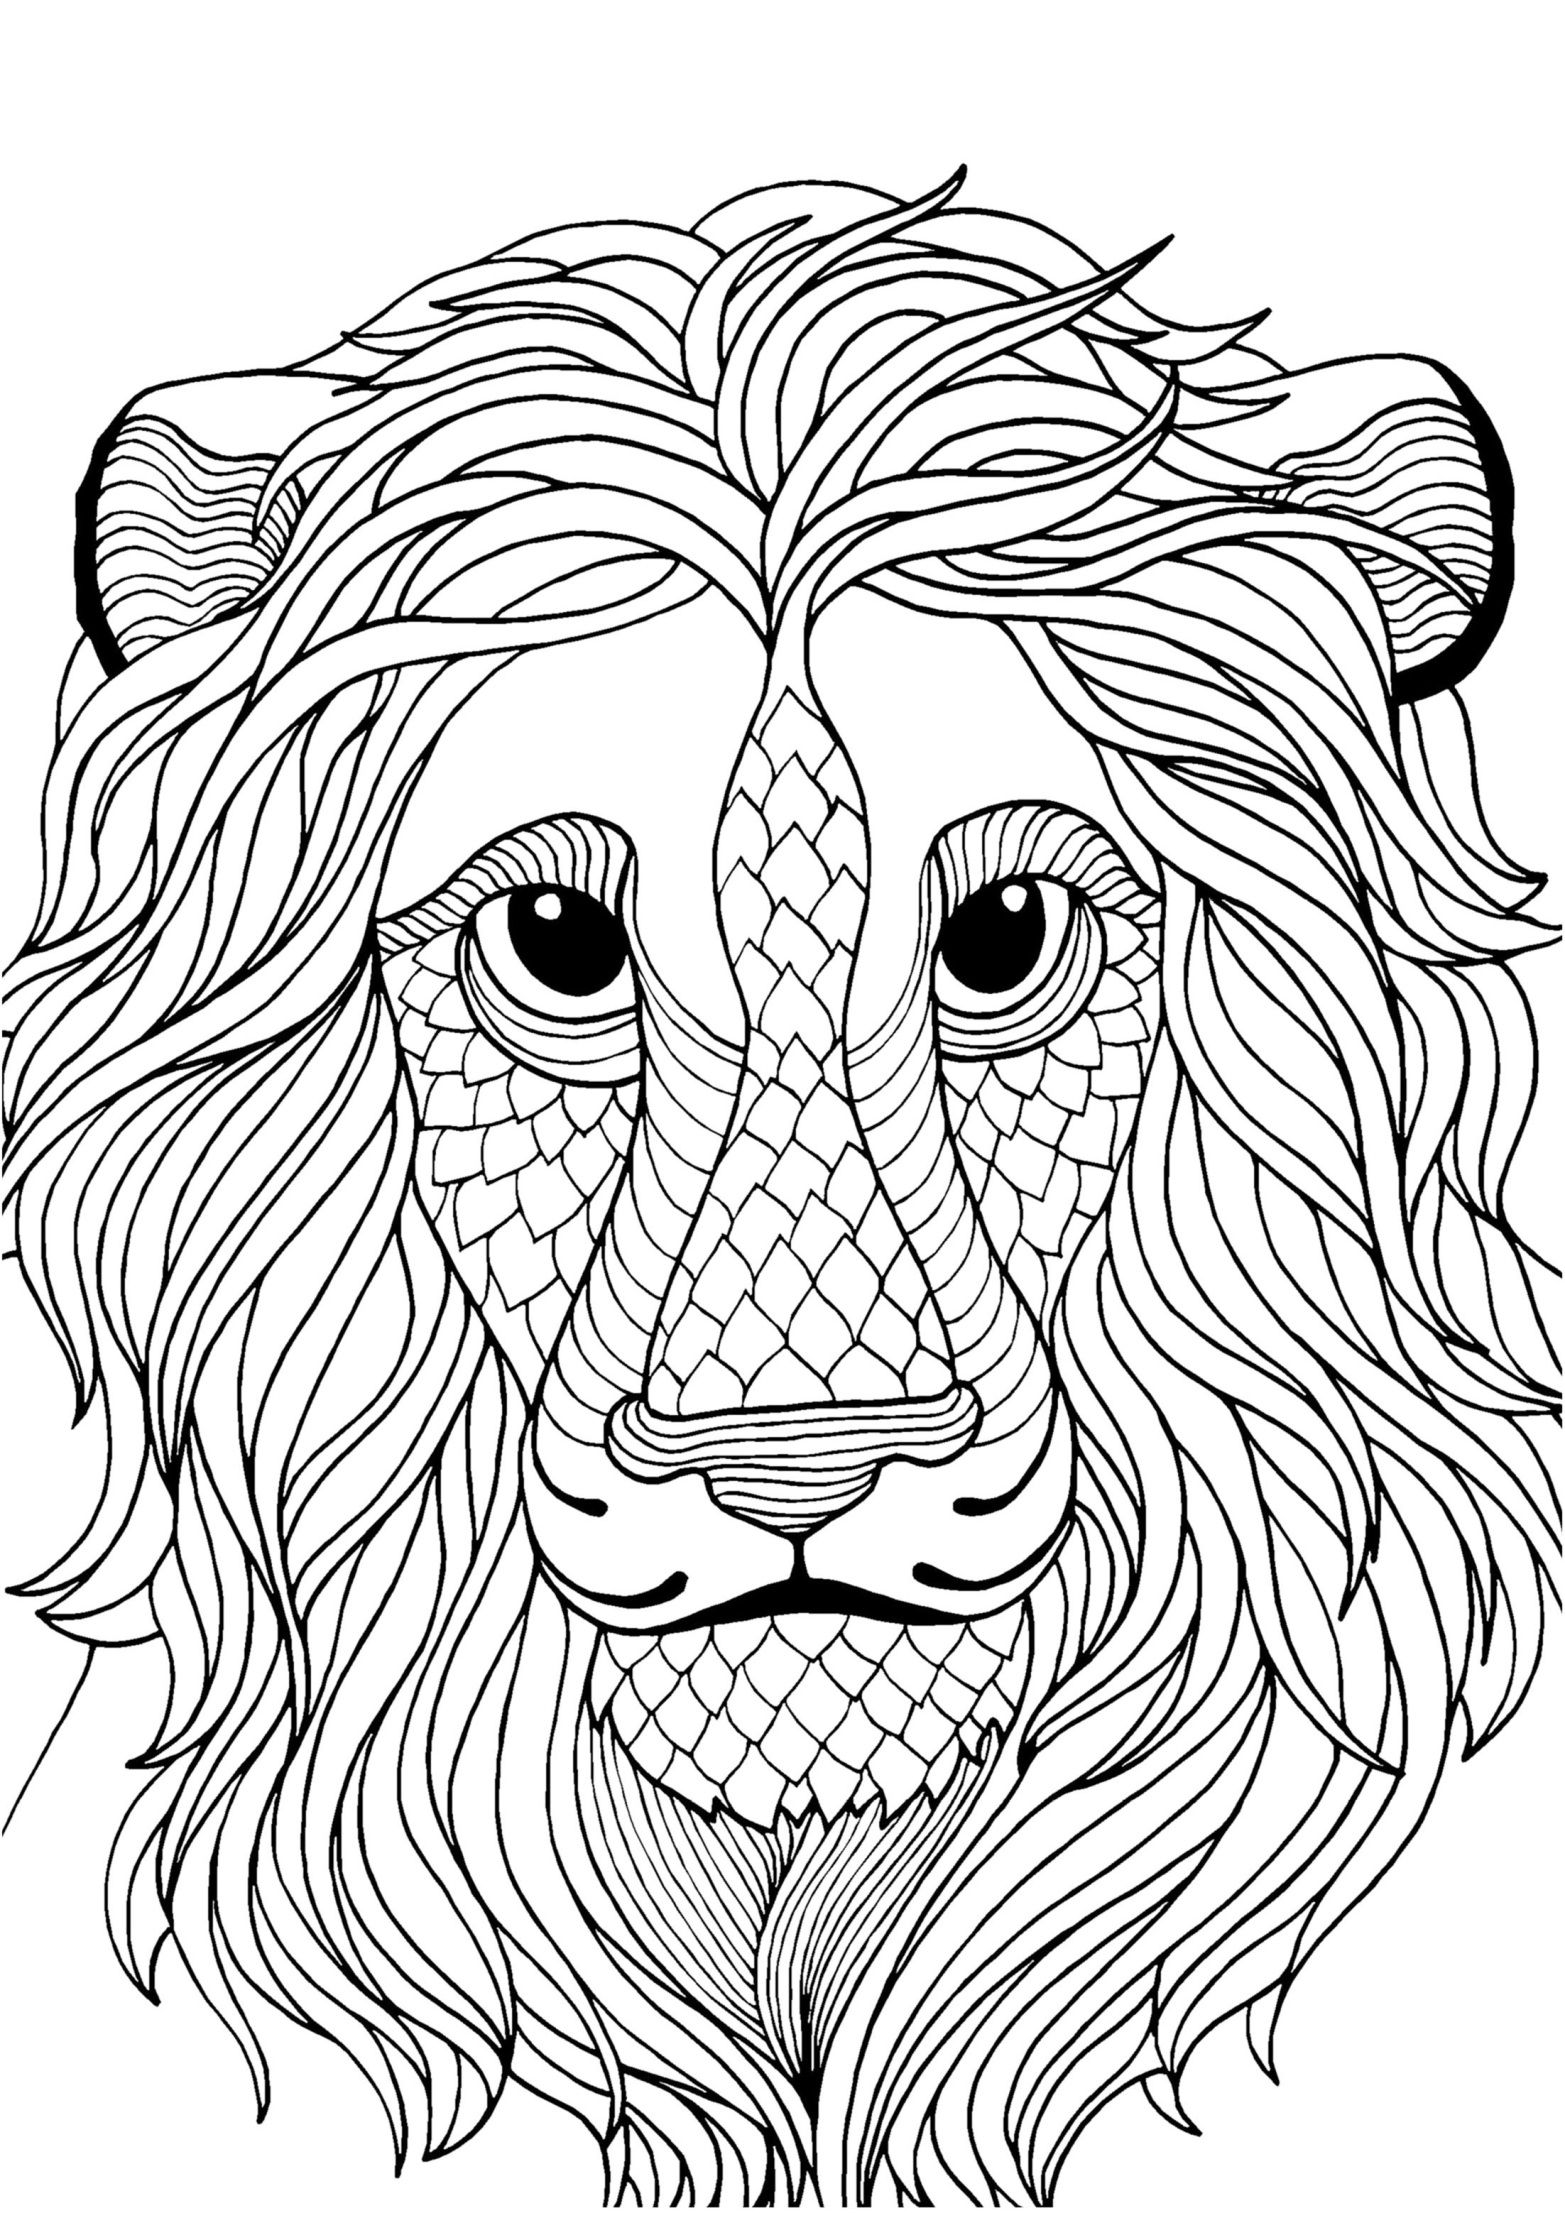 Antistress lion Coloring Pages to download and print for free